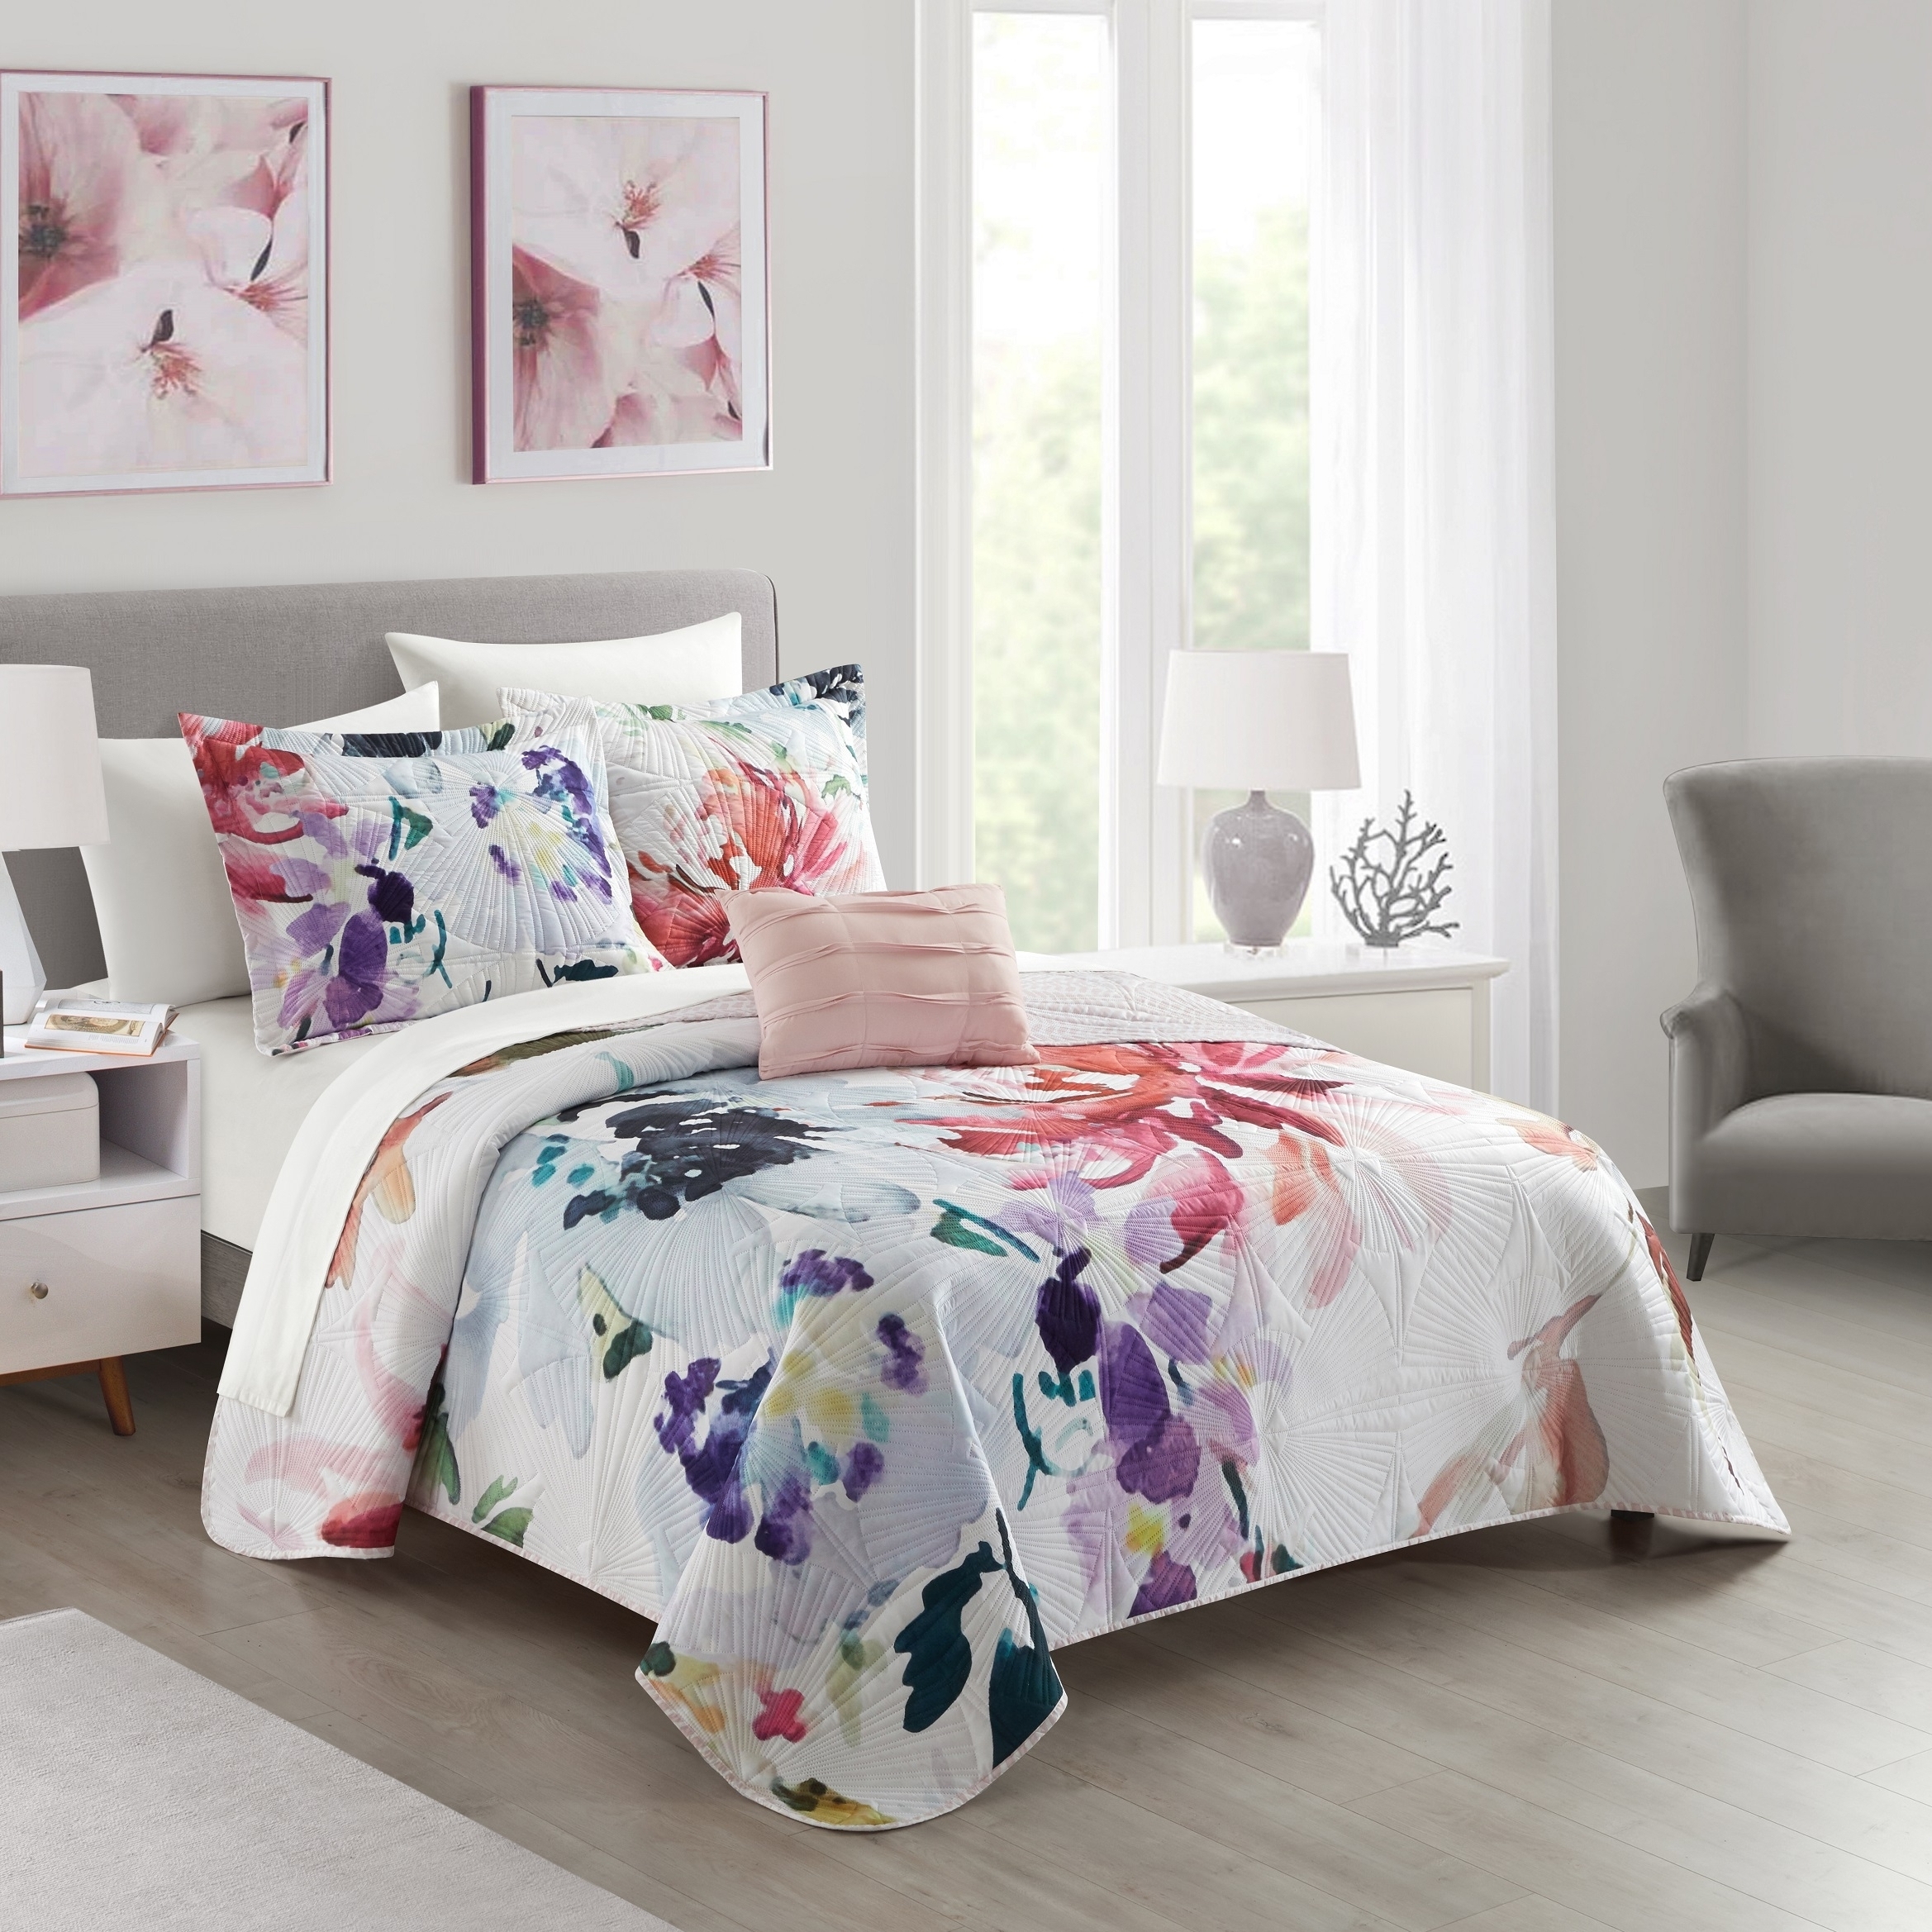 Ateus Palace 3 Or 4Piece Reversible Quilt Set Floral Watercolor Design Bedding - Red Hatsie, Twin (3 Piece)